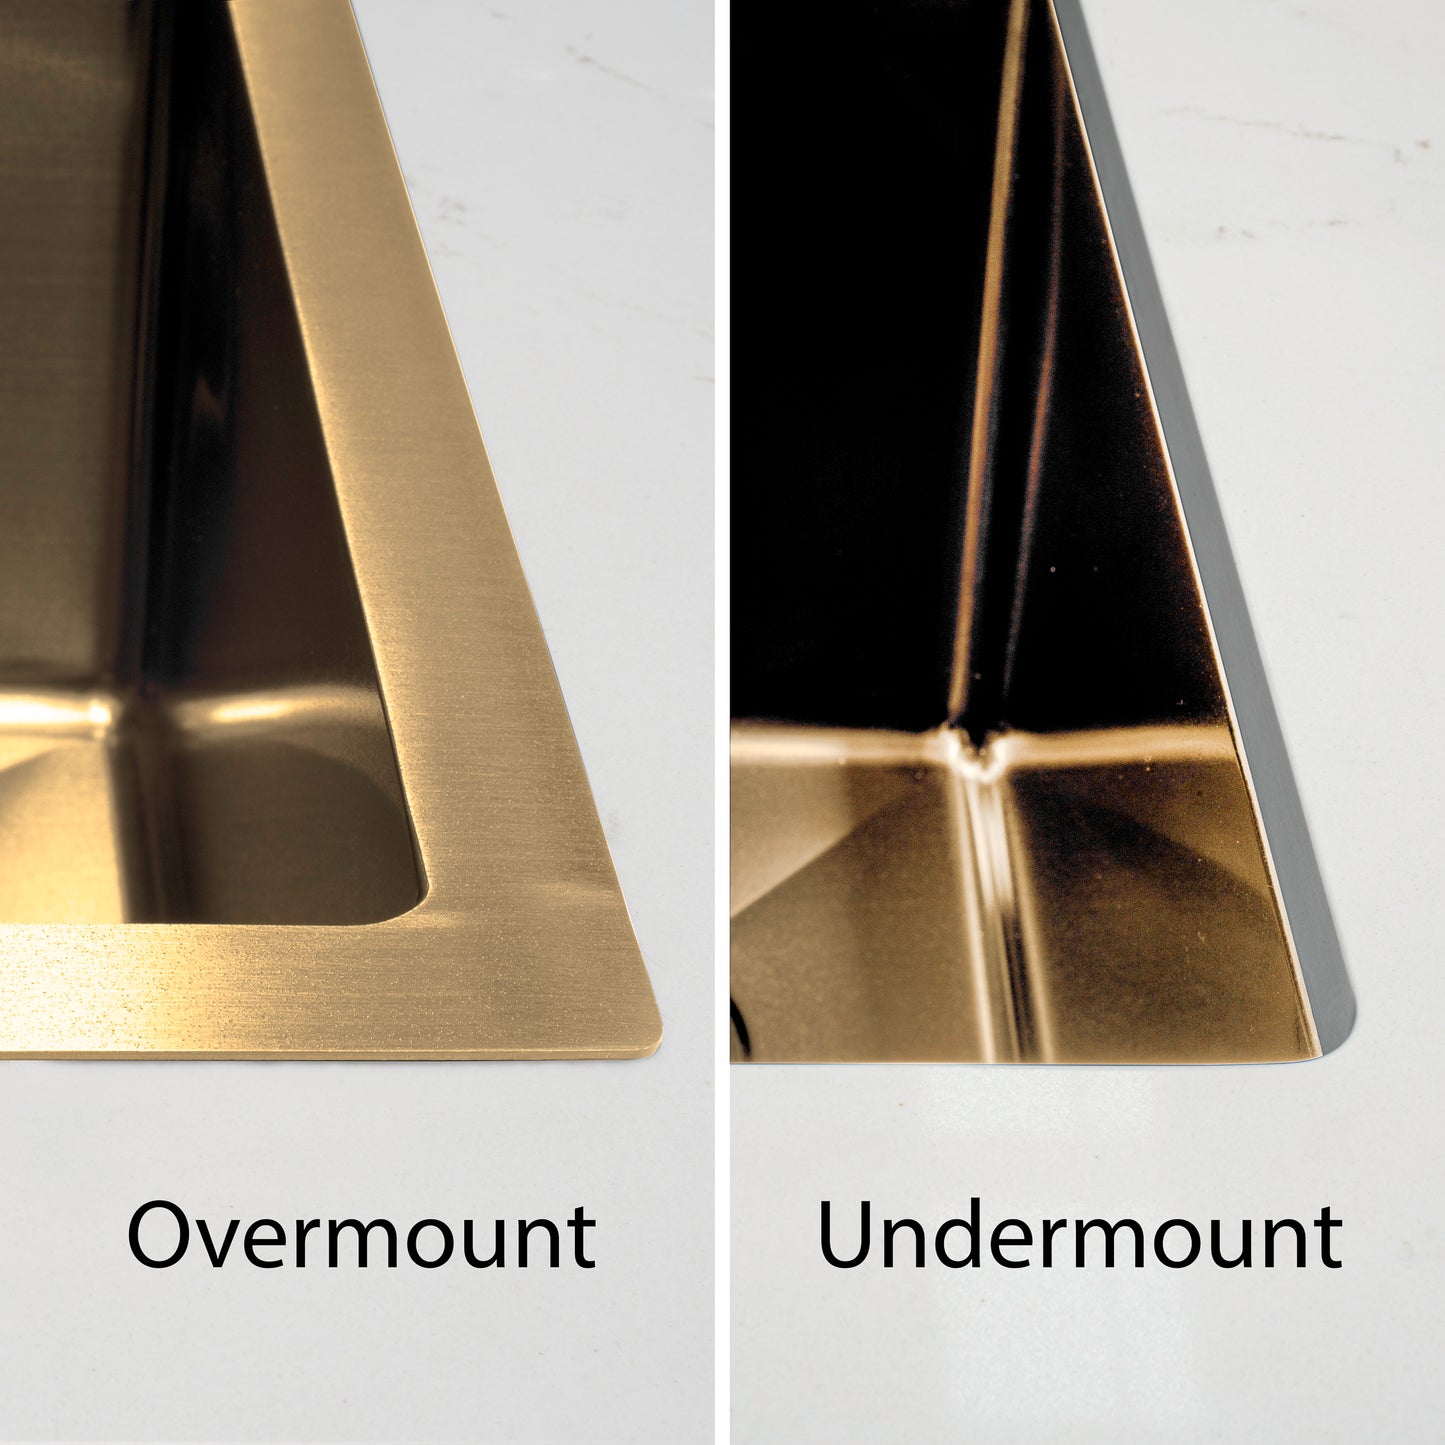 Retto 770mm x 450mm x 230mm Stainless Steel Double Sink | Brushed Brass (gold) |